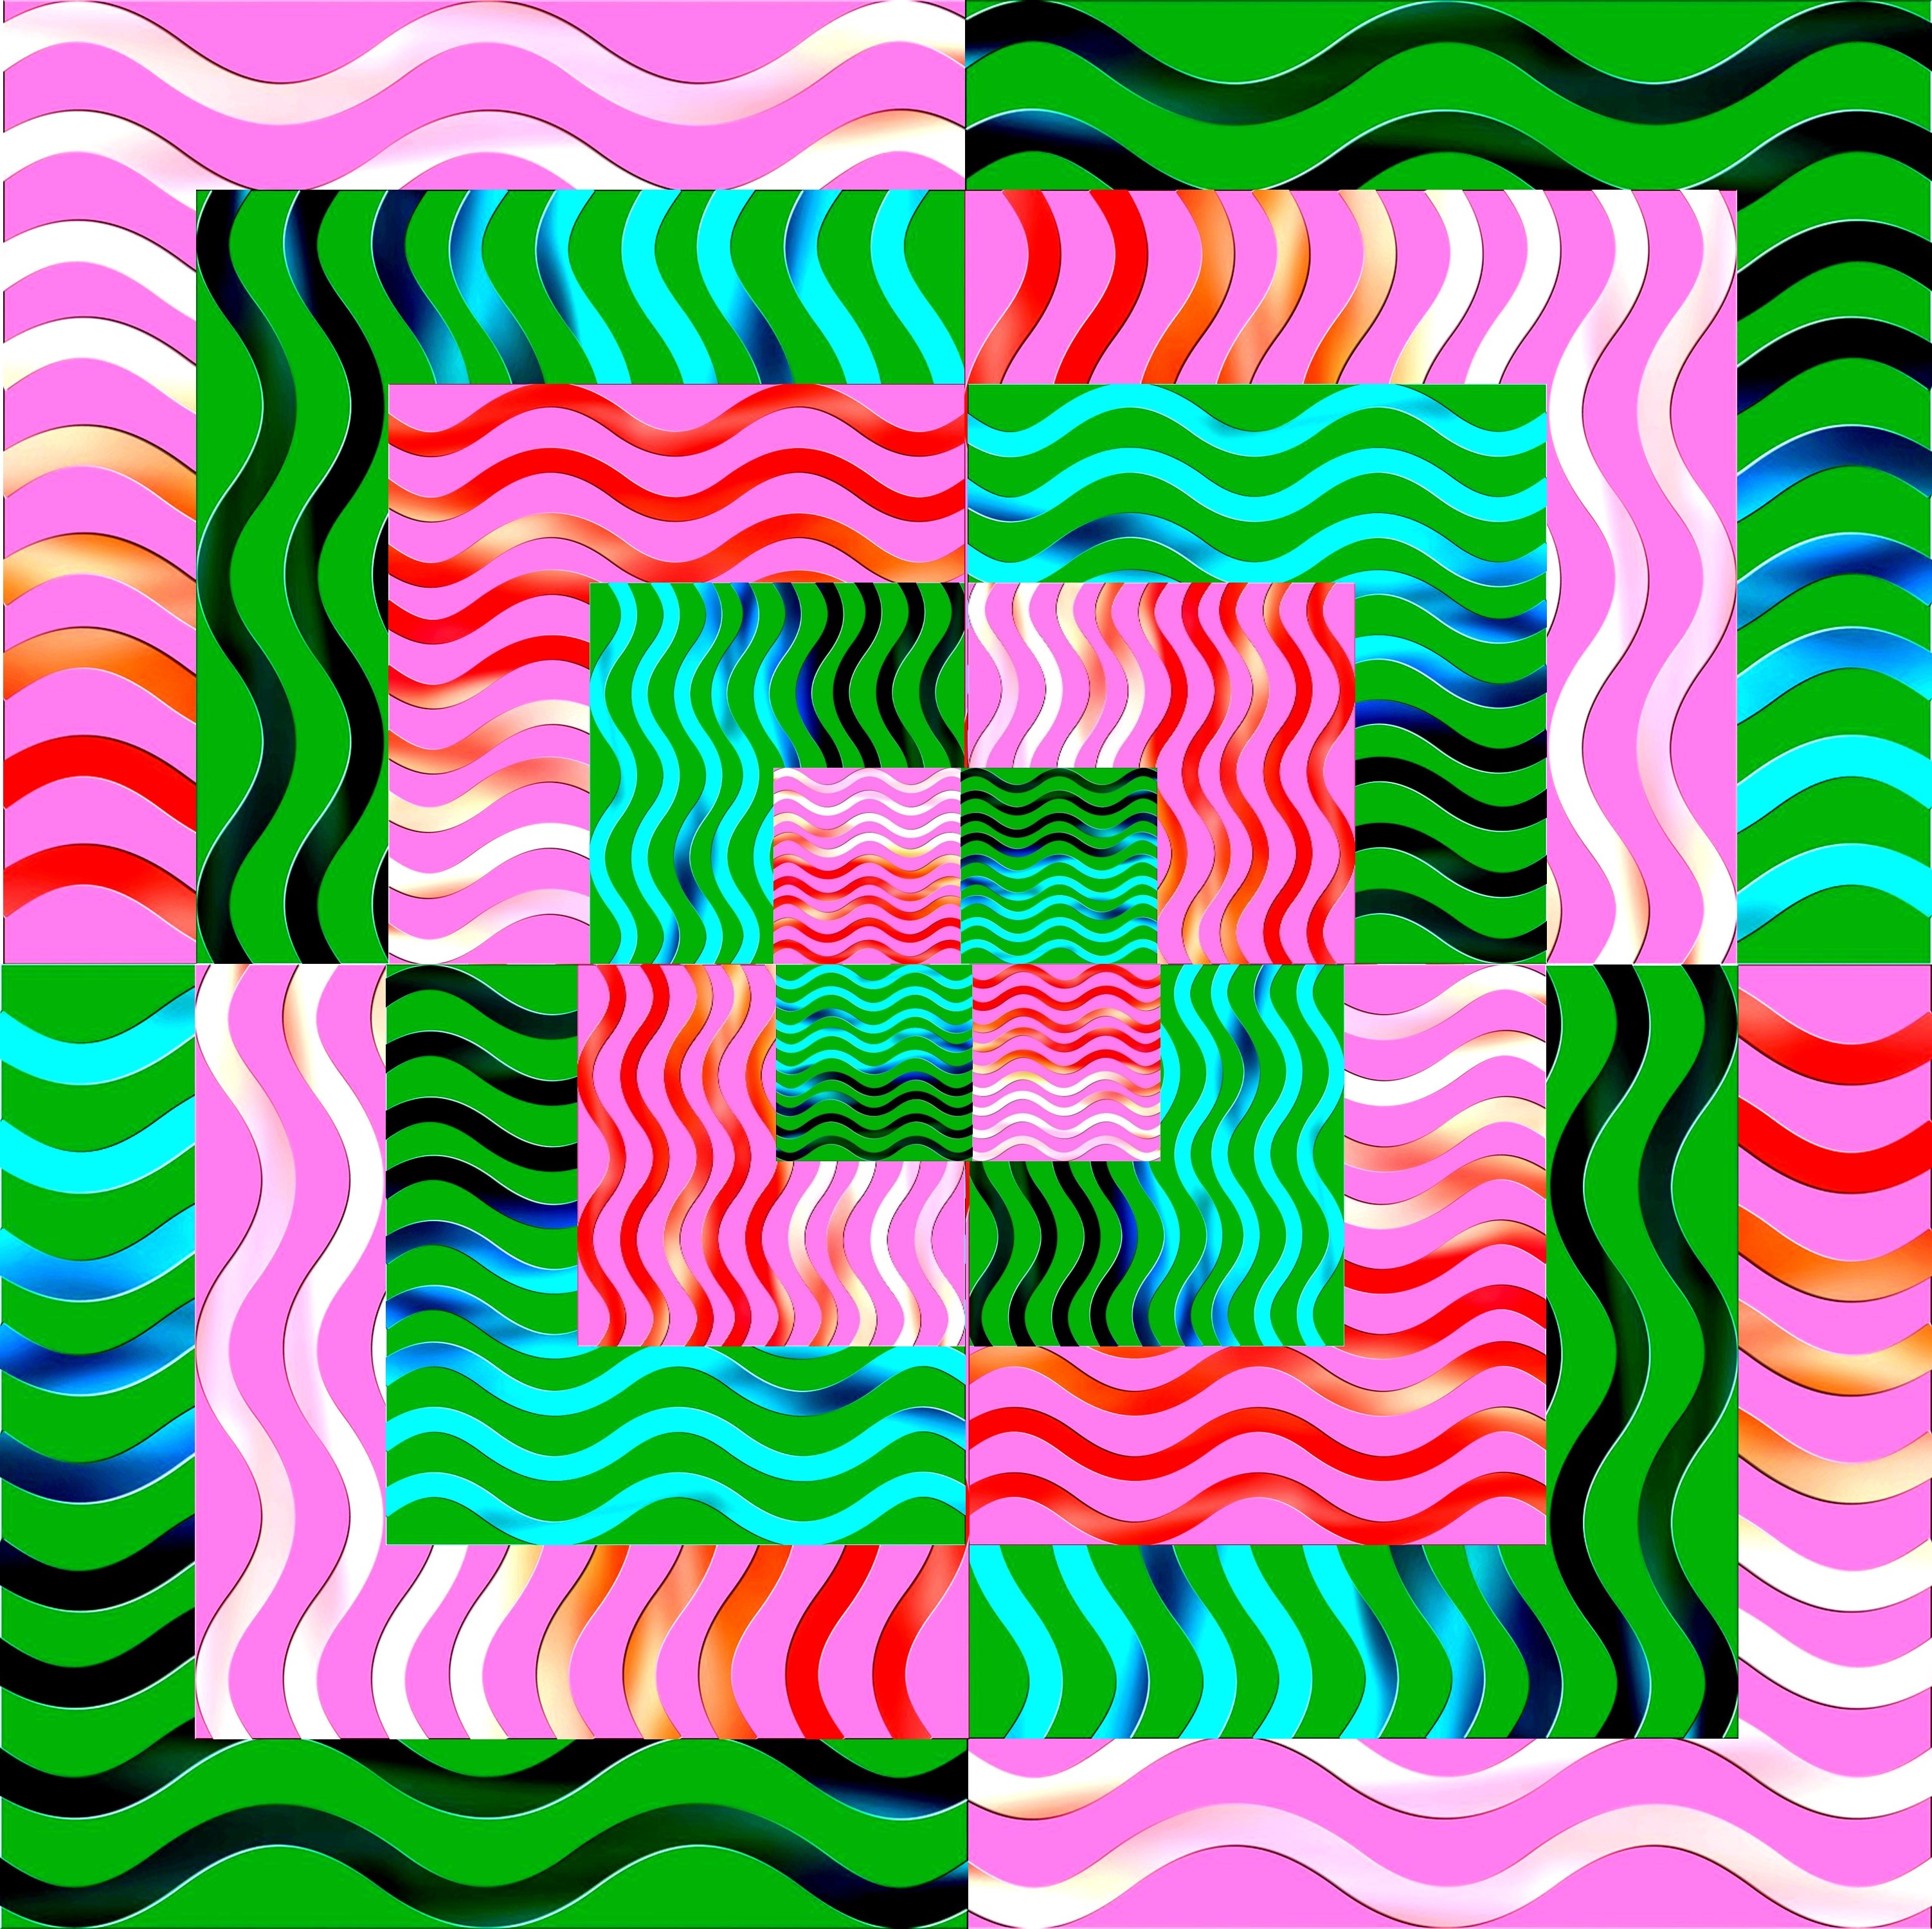 Abstract Pink and Emerald